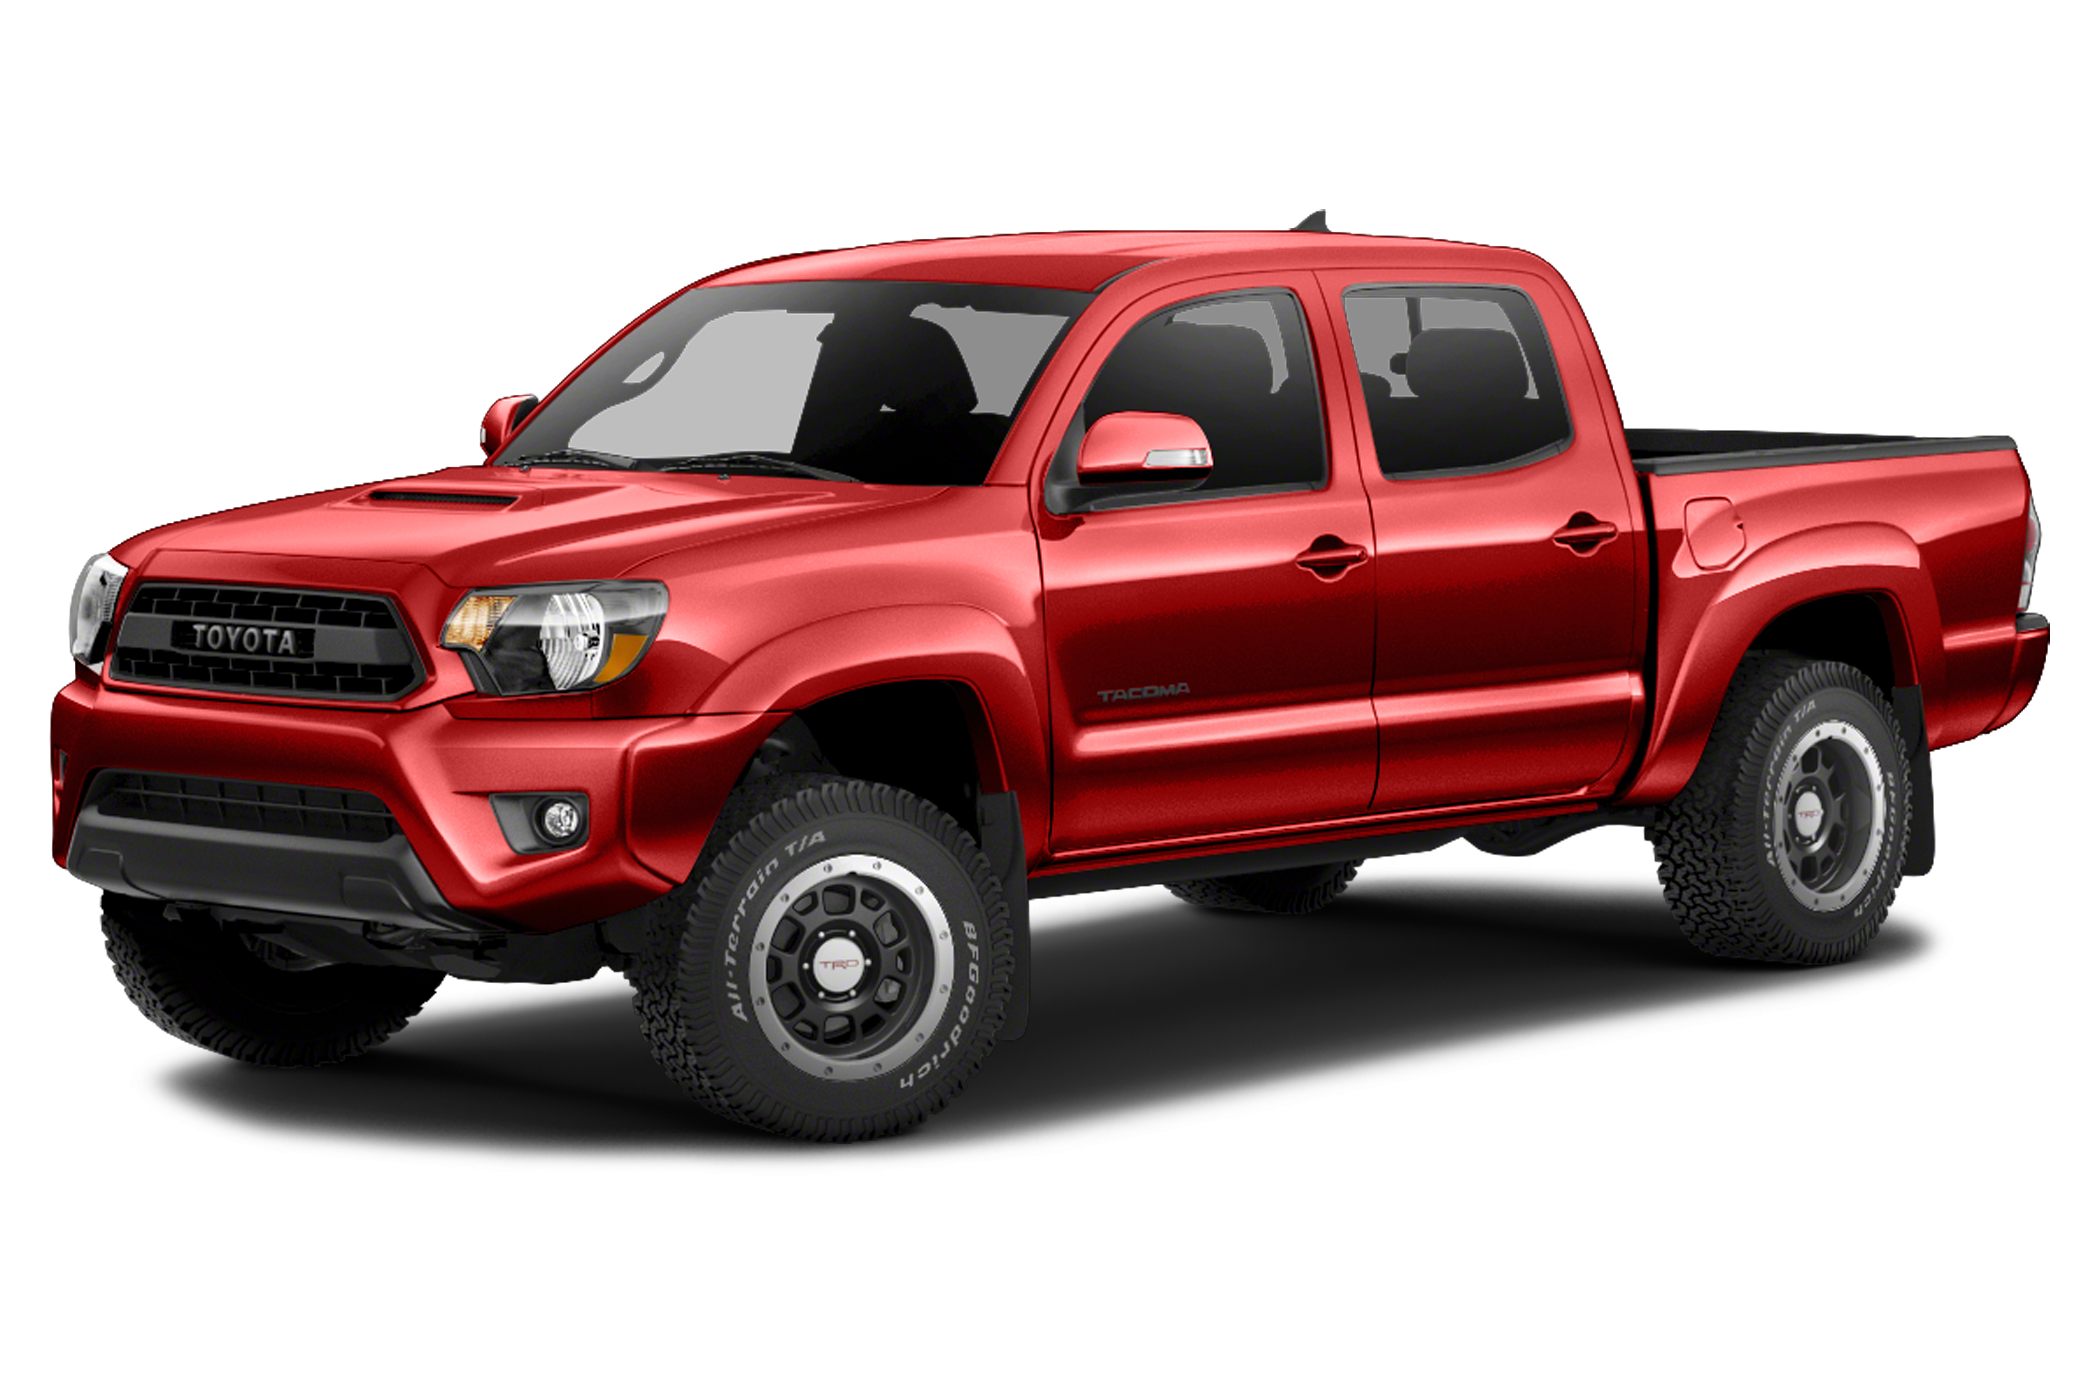 2015 Toyota Tacoma TRD Pro 4x4 Double Cab 127.4 in. WB Pictures